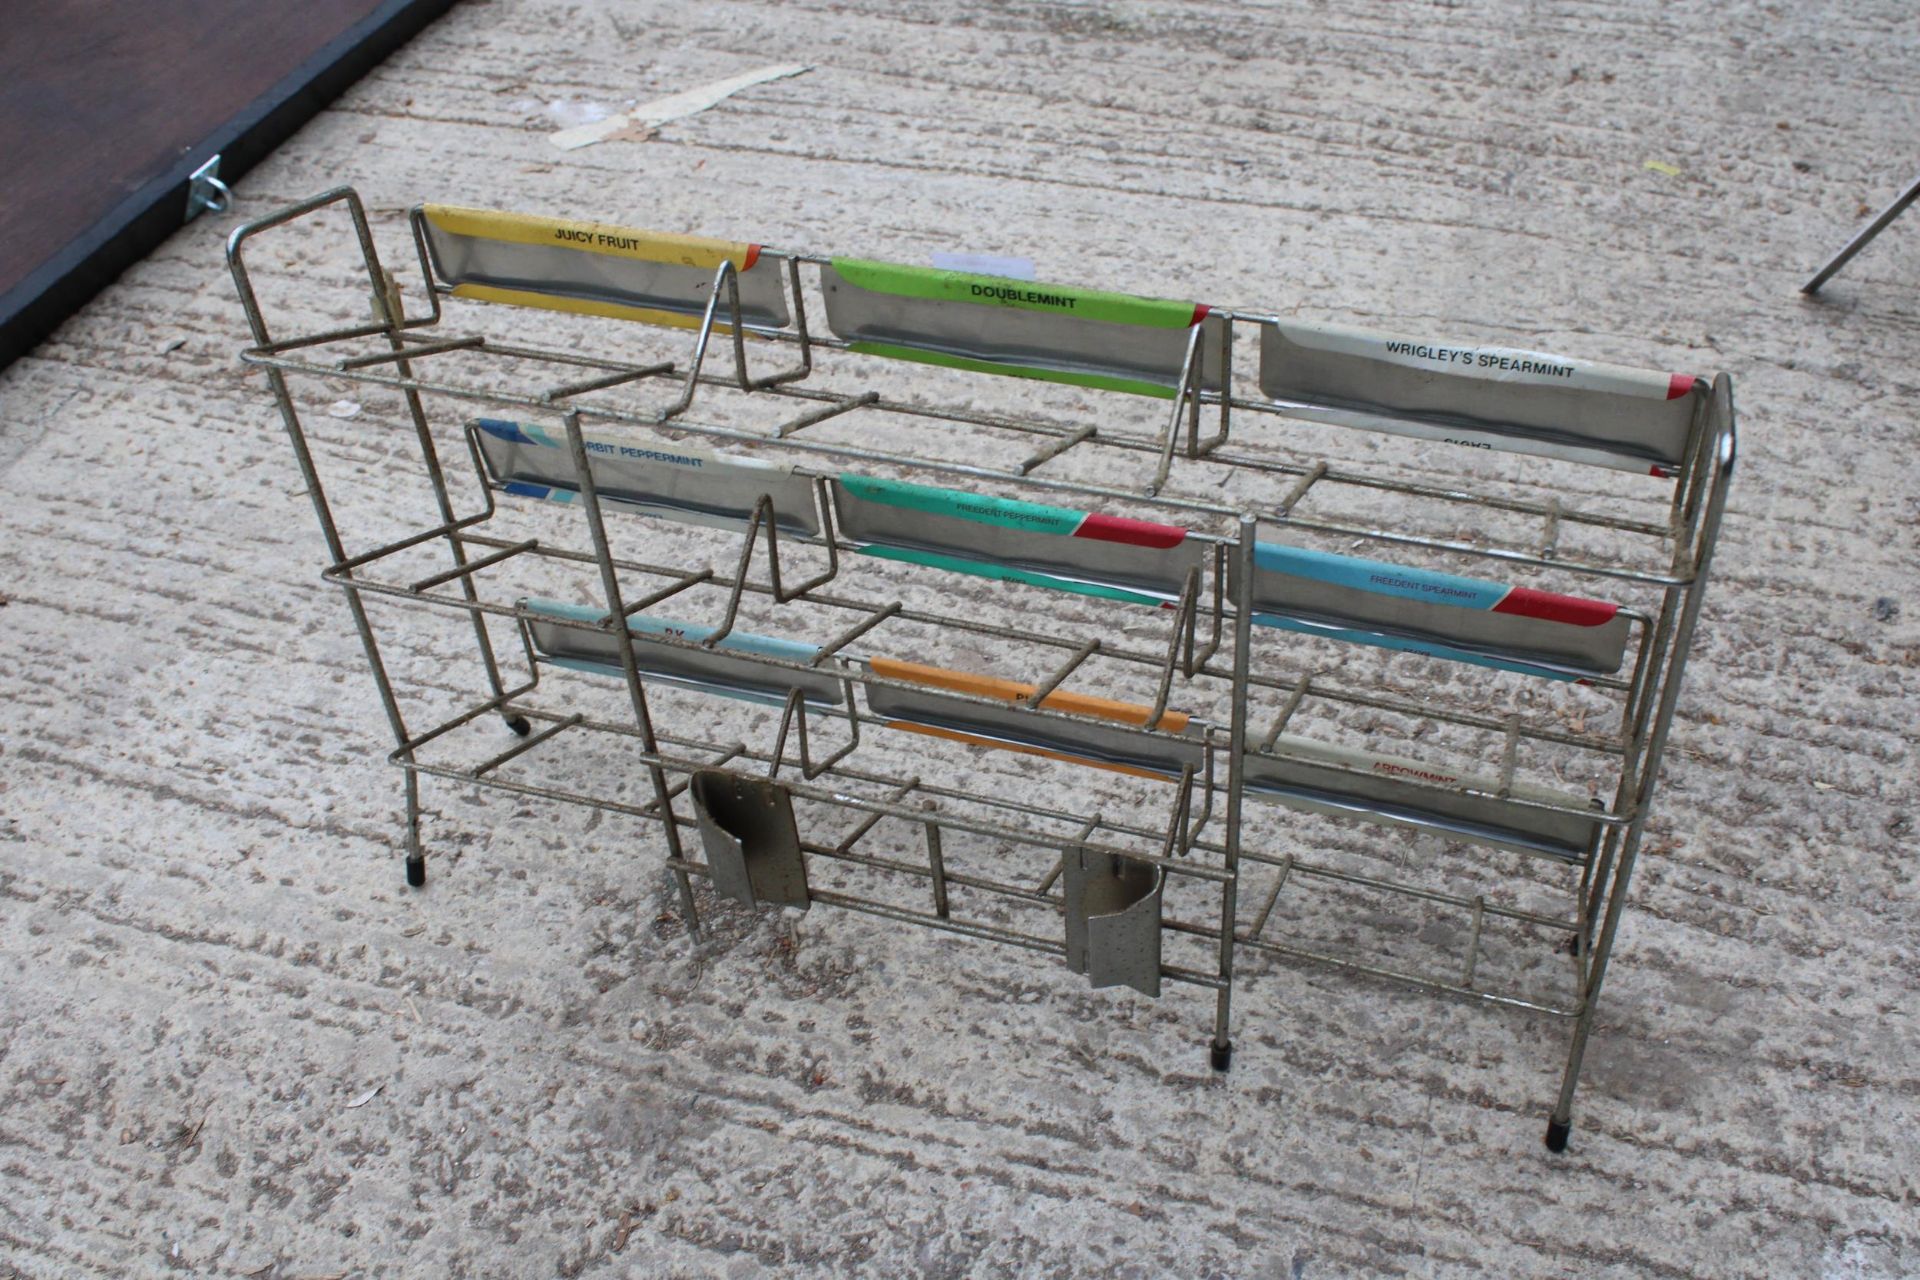 A VINTAGE METAL CHEWING GUM DISPLAY STAND - Image 2 of 2